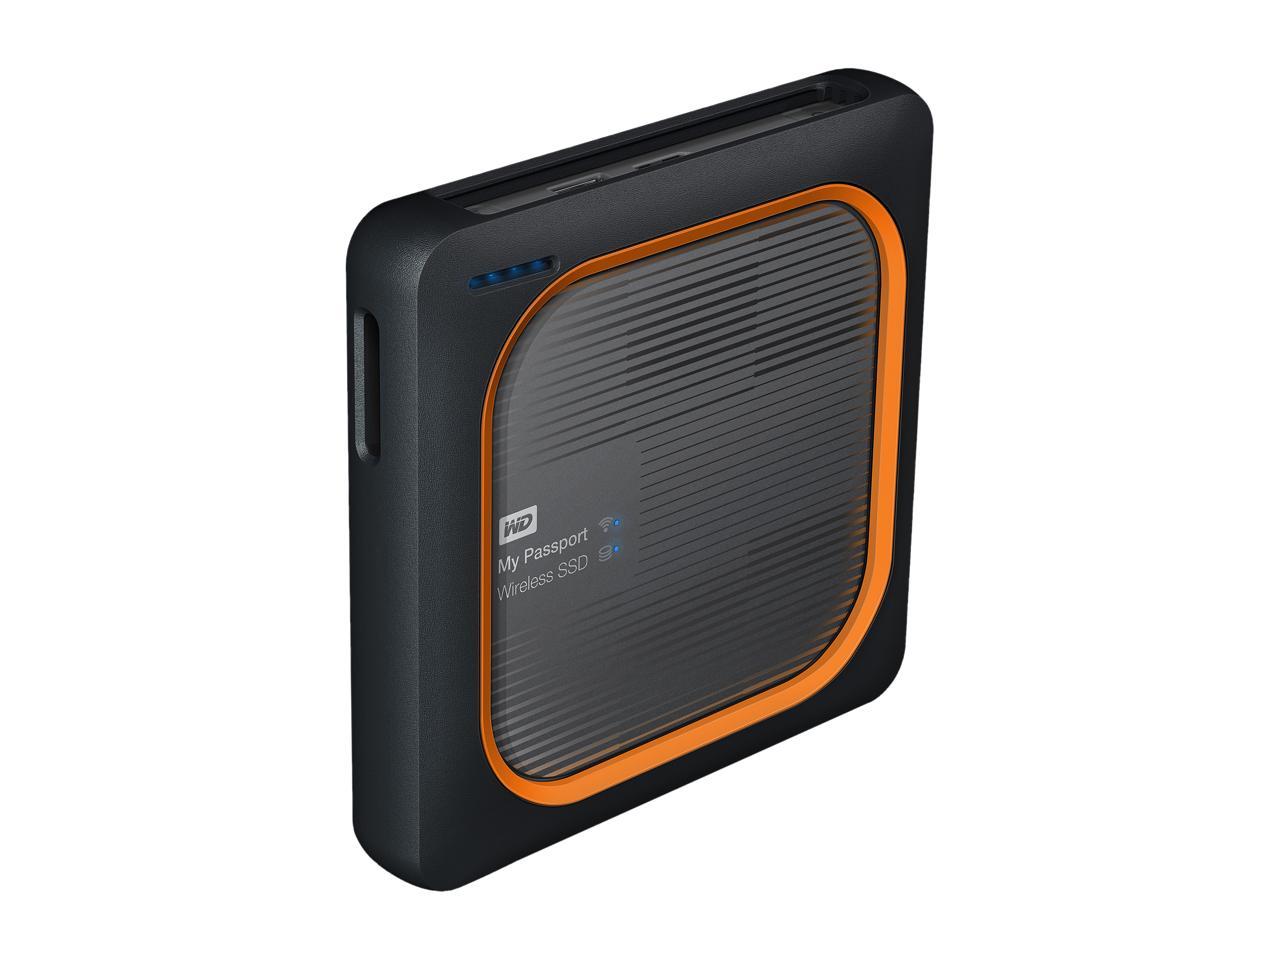 WD 1TB My Passport Wireless SSD External Portable Drive - One-touch SD Card Backup, AC Wi-Fi, USB 3.0, Mobile Access & 4K Streaming